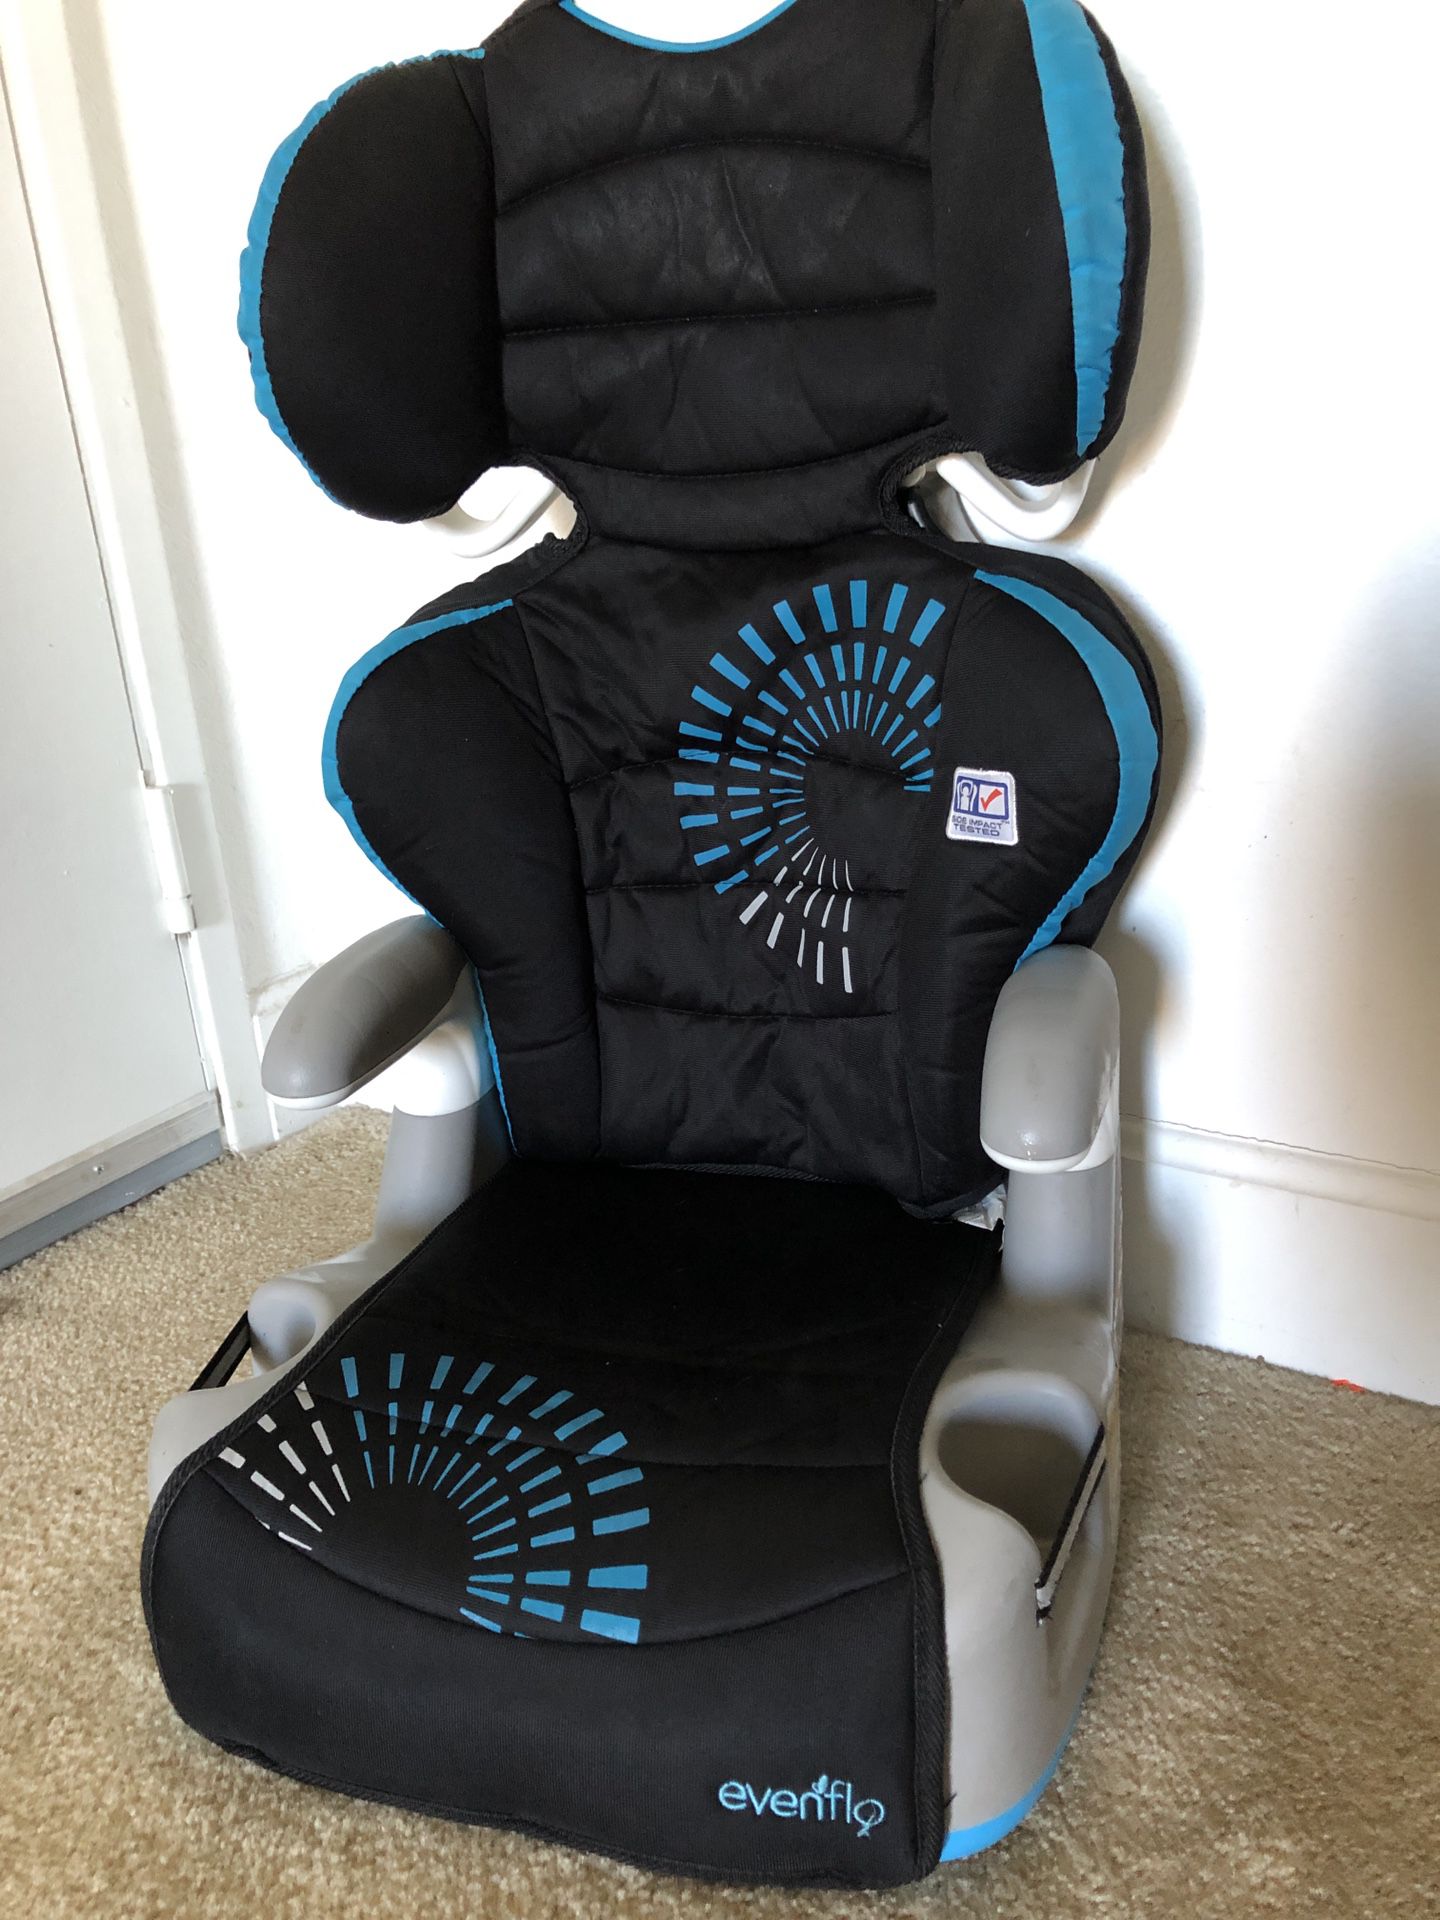 Evenflo Booster Seat Manufactured 2017